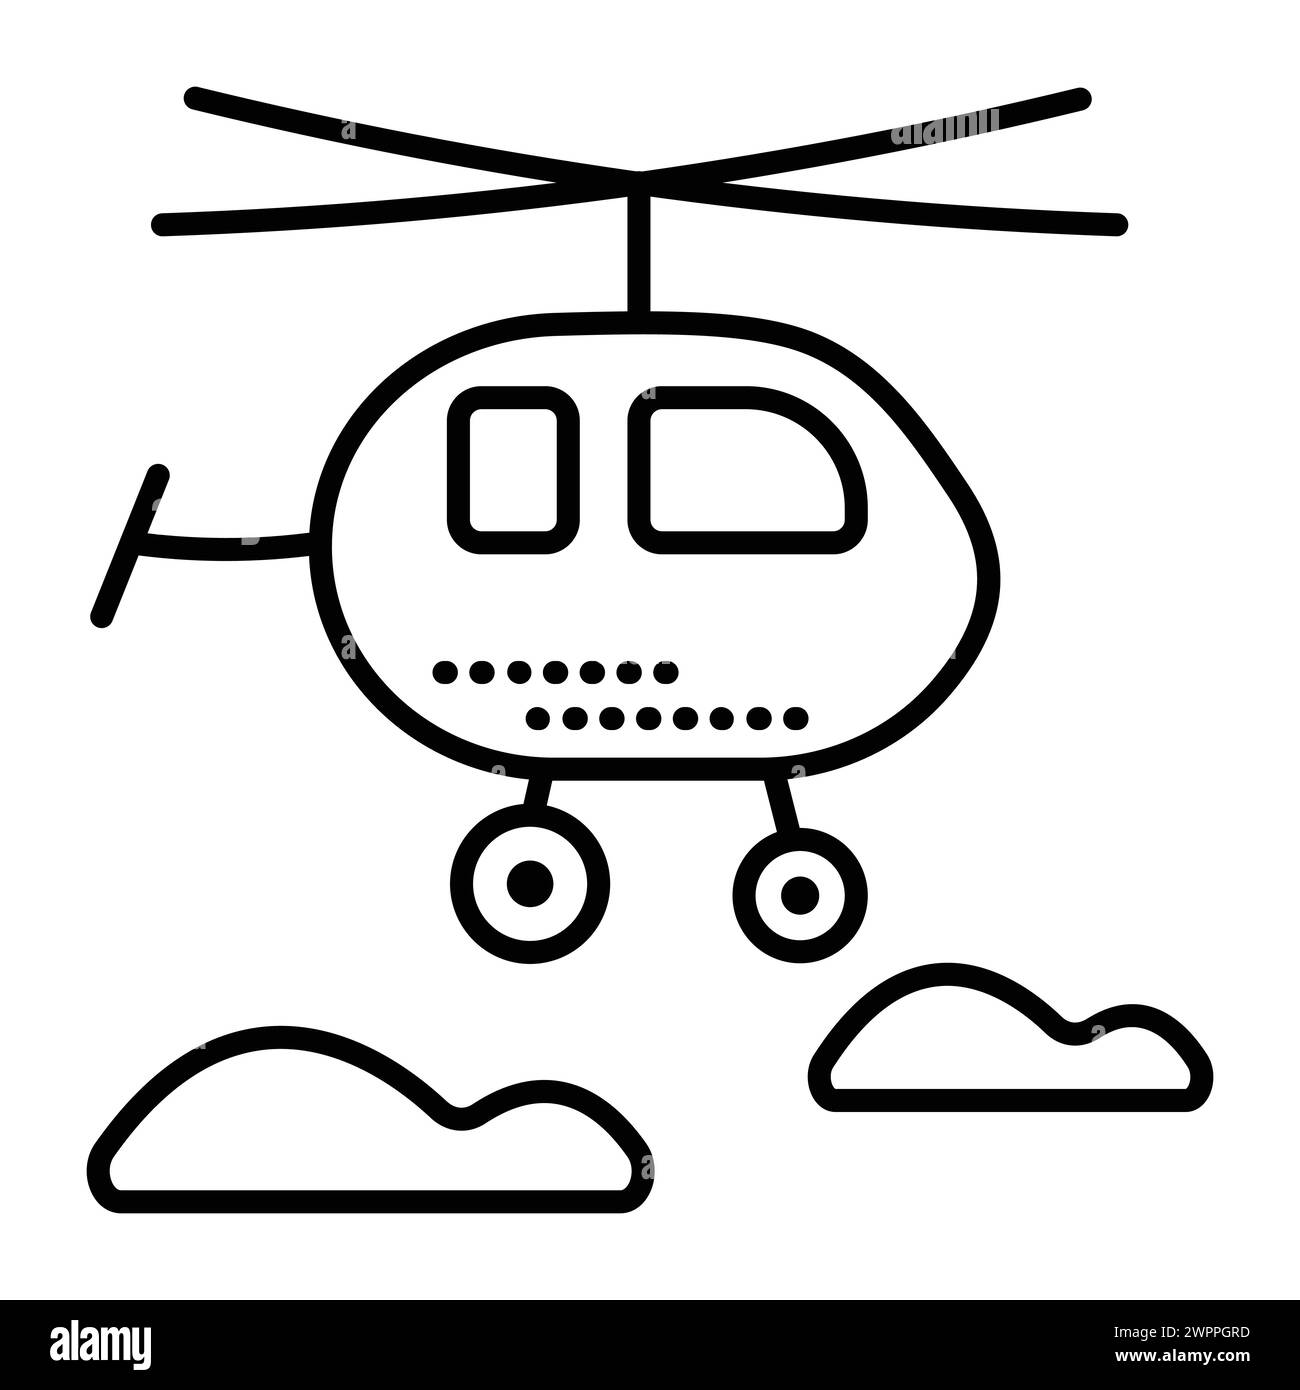 Single helicopter black line vector icon, clouds and copter pictogram, cute chopper in flight, minimal illustration Stock Vector